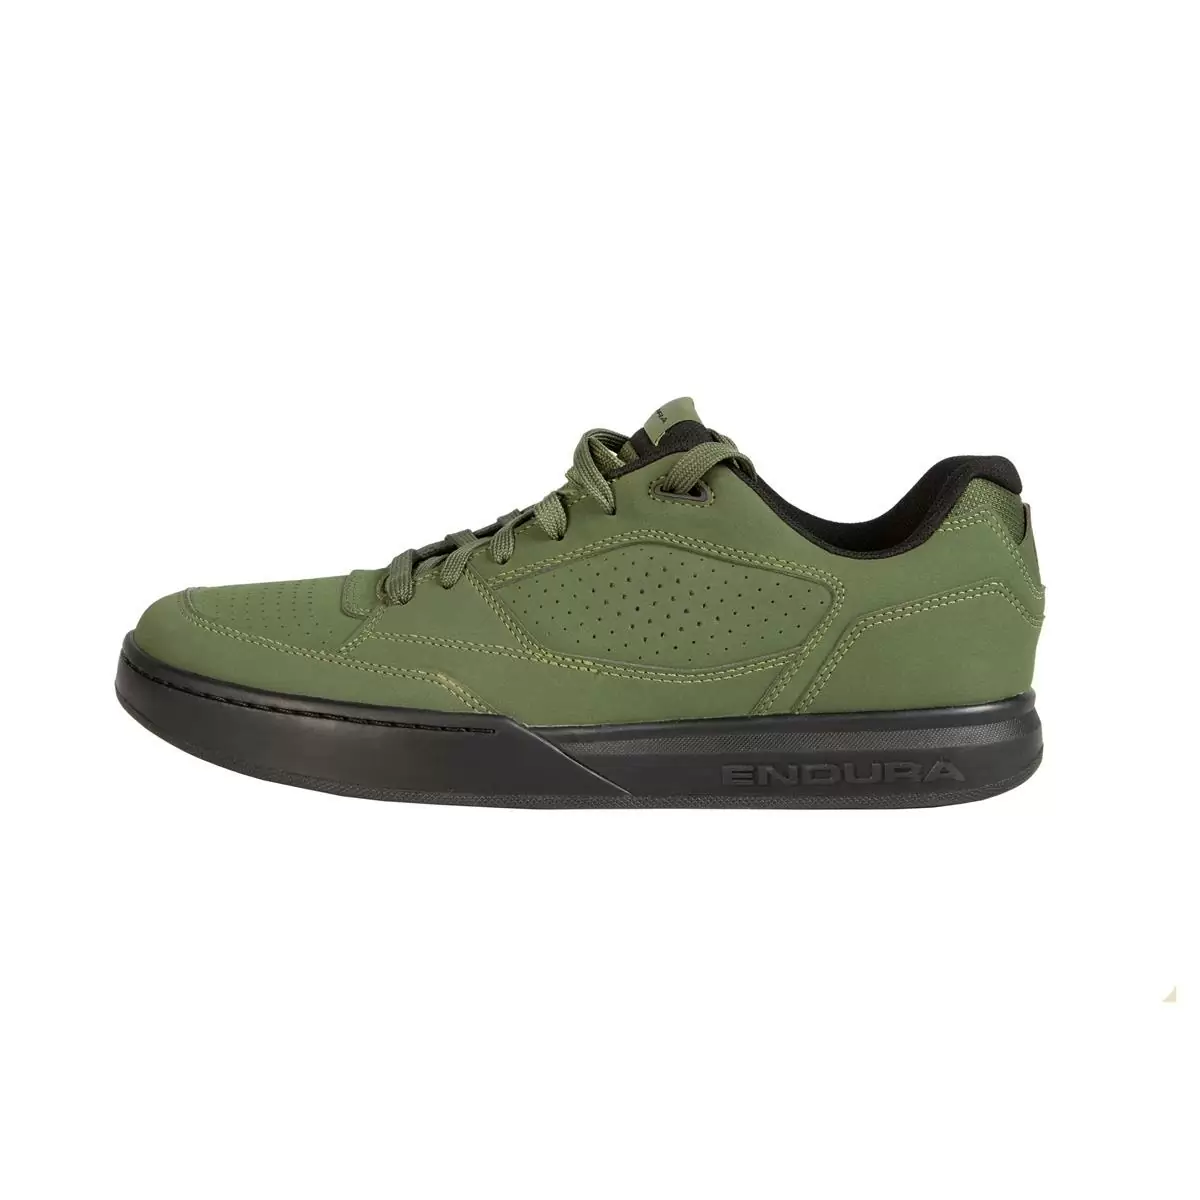 Hummvee Flat Pedal Shoes Green Size 45 #1